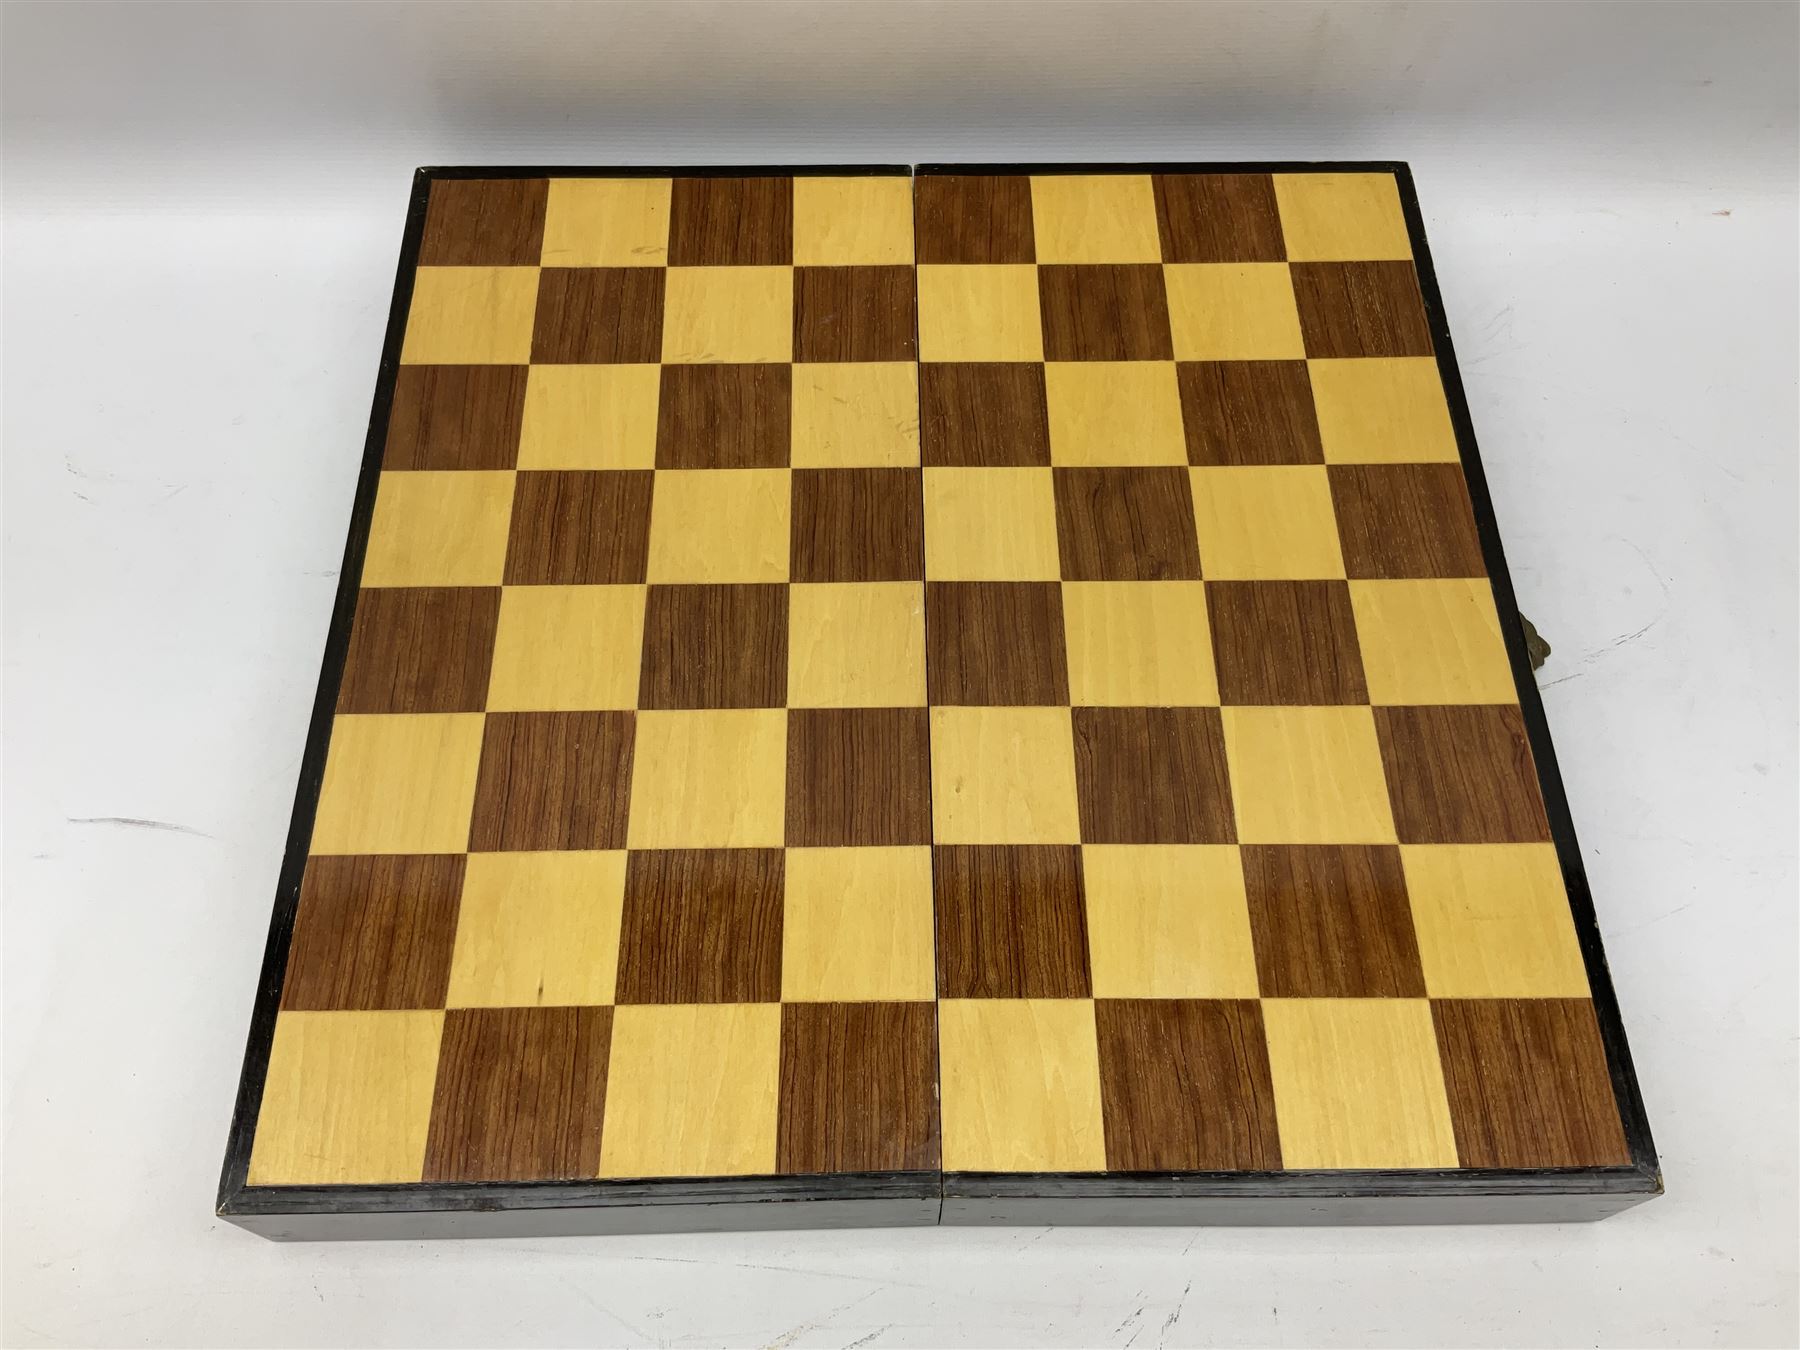 Chinese style chess set and folding storage board - Image 5 of 5